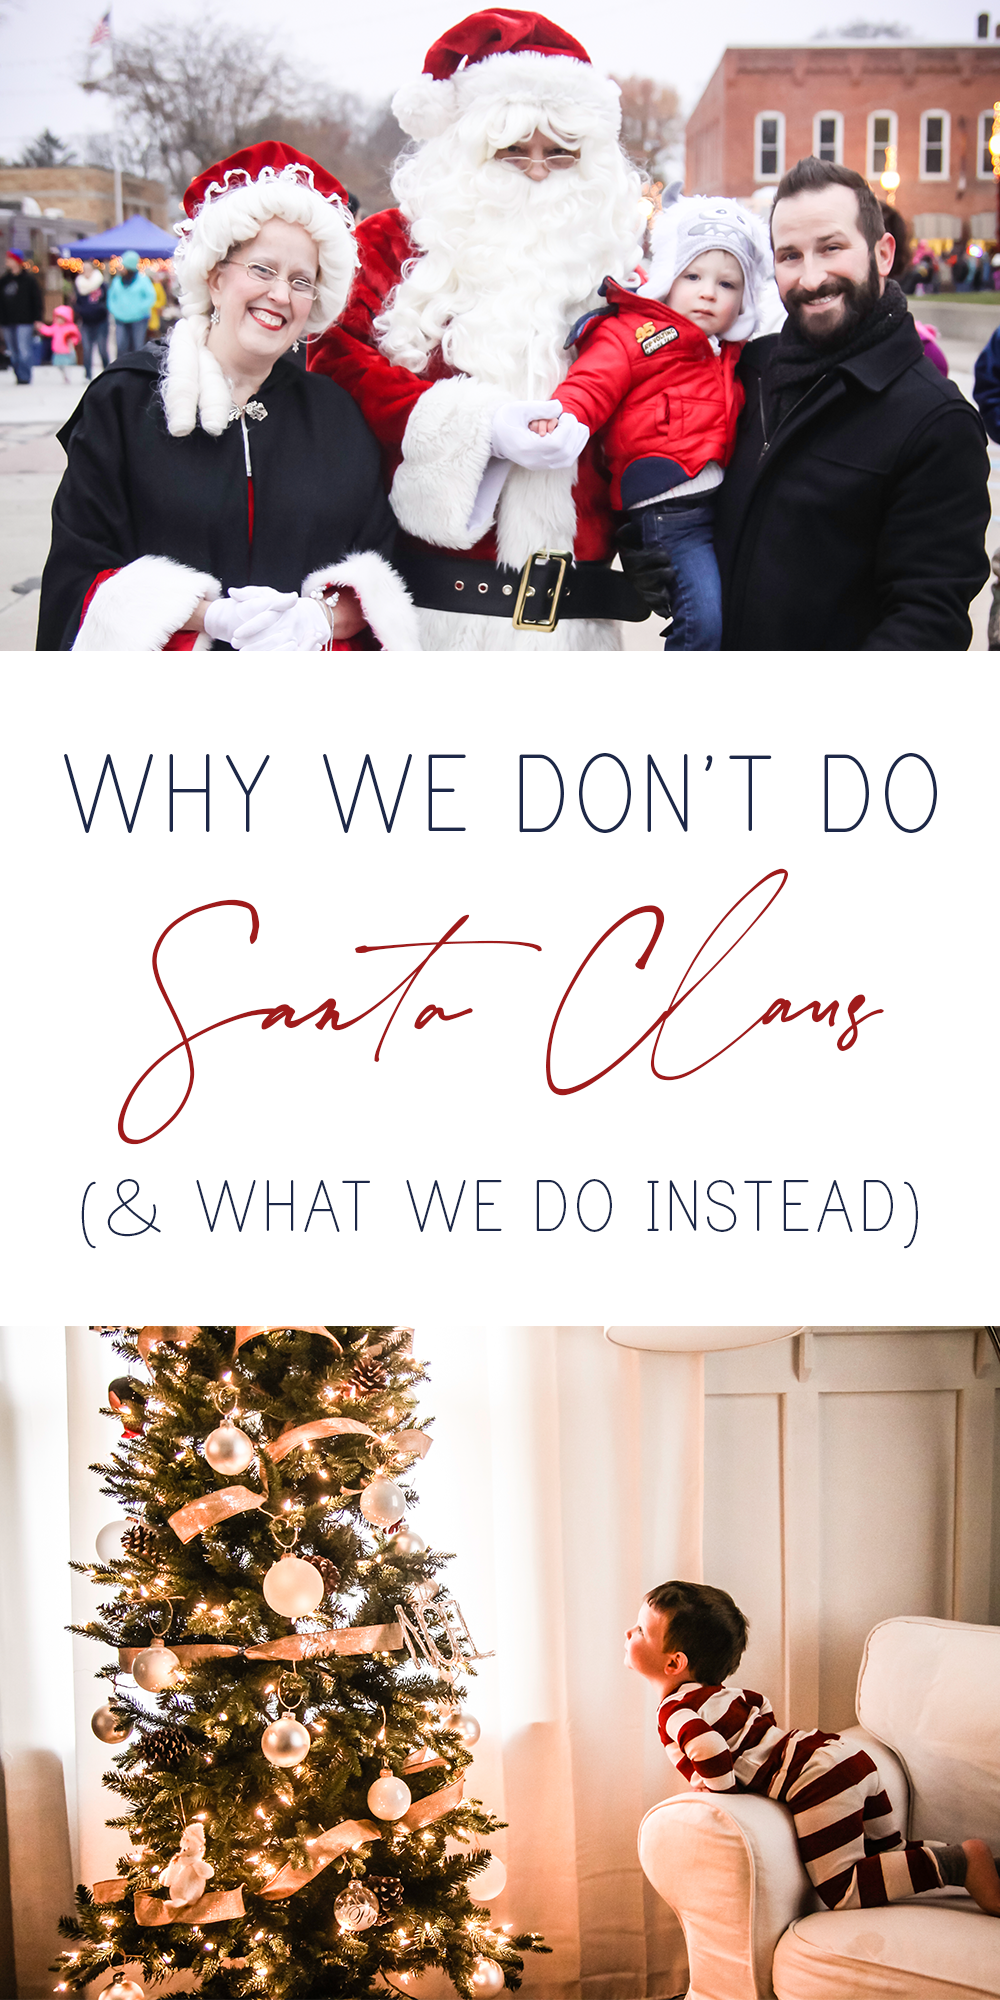 Why We Don't Do Santa Claus & What We do Instead